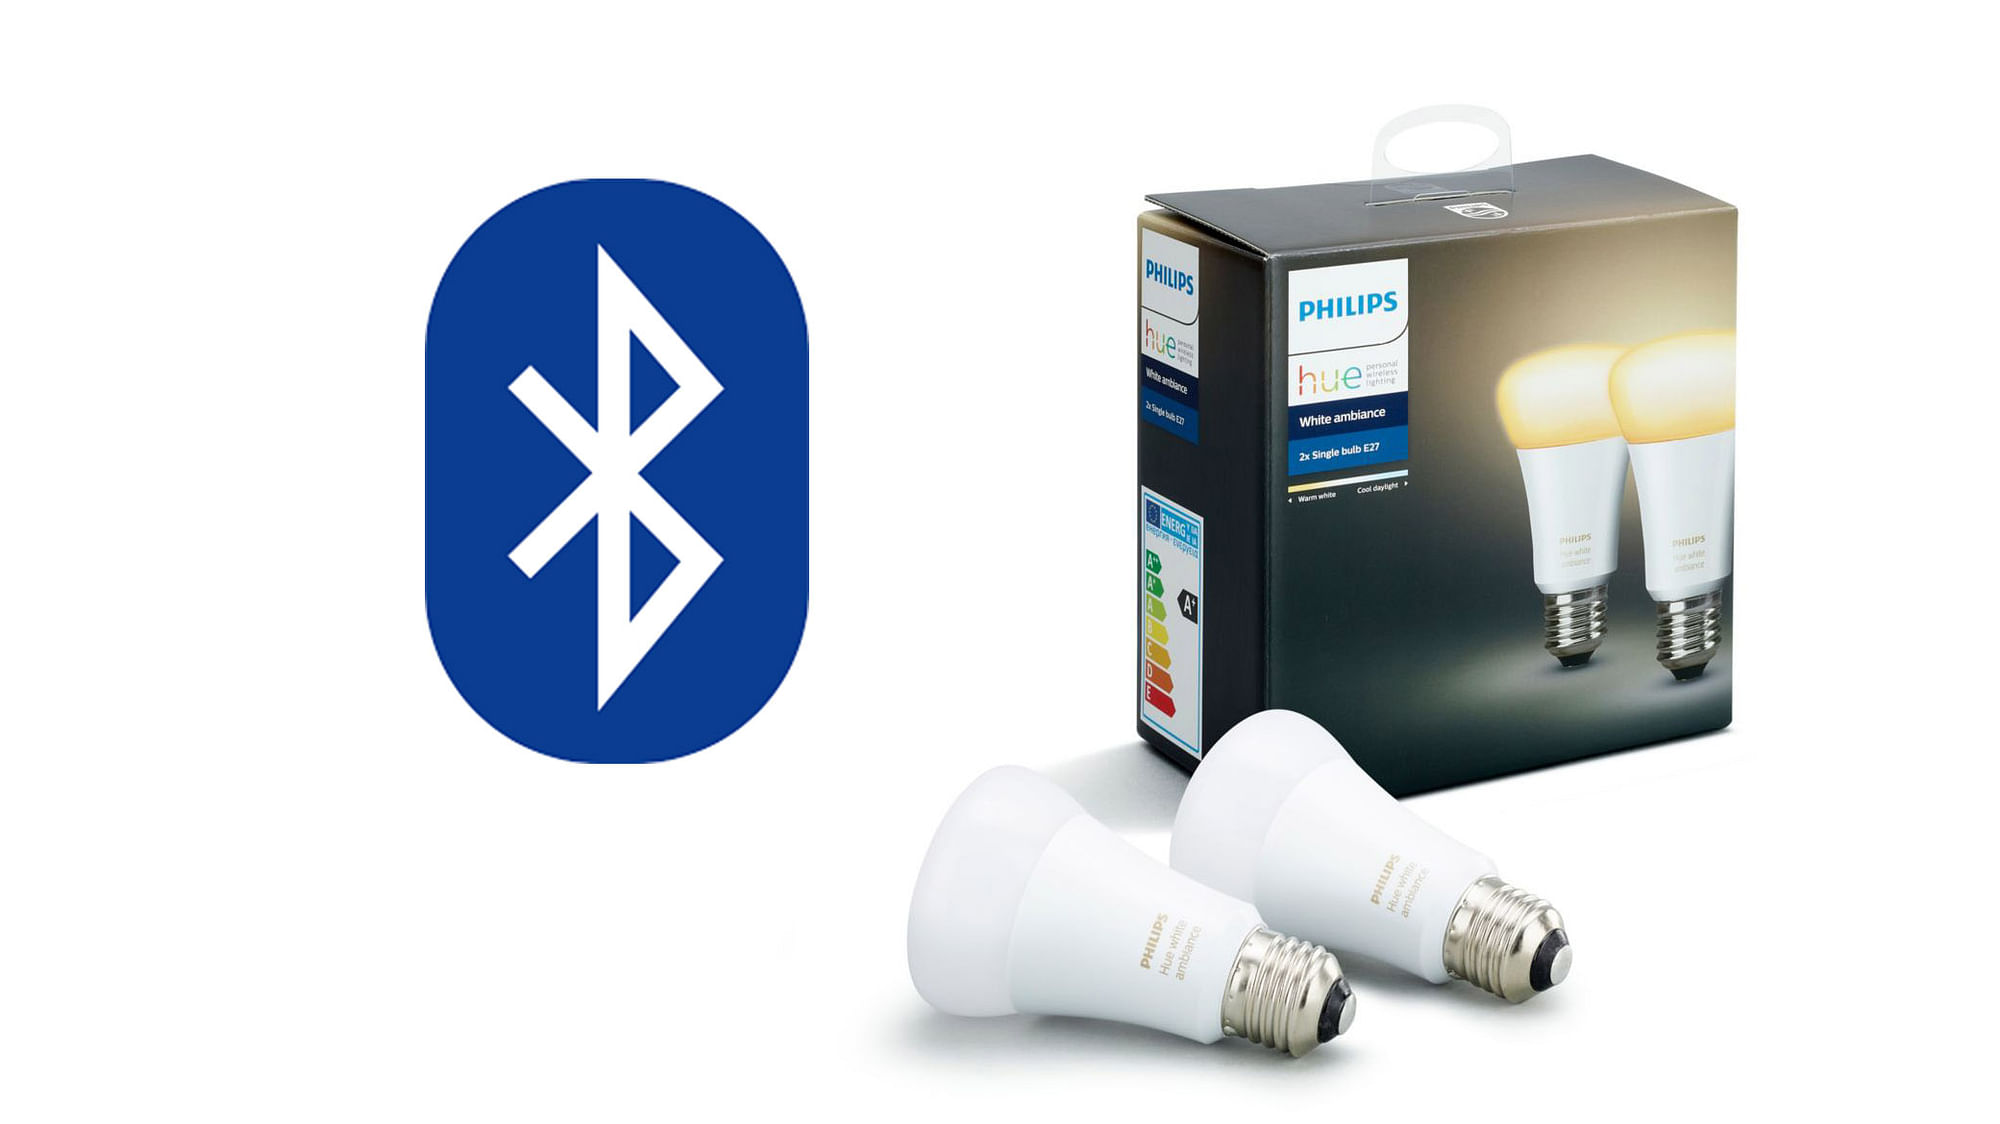 Philips Hue bulbs will not come with Bluetooth receiver built in.